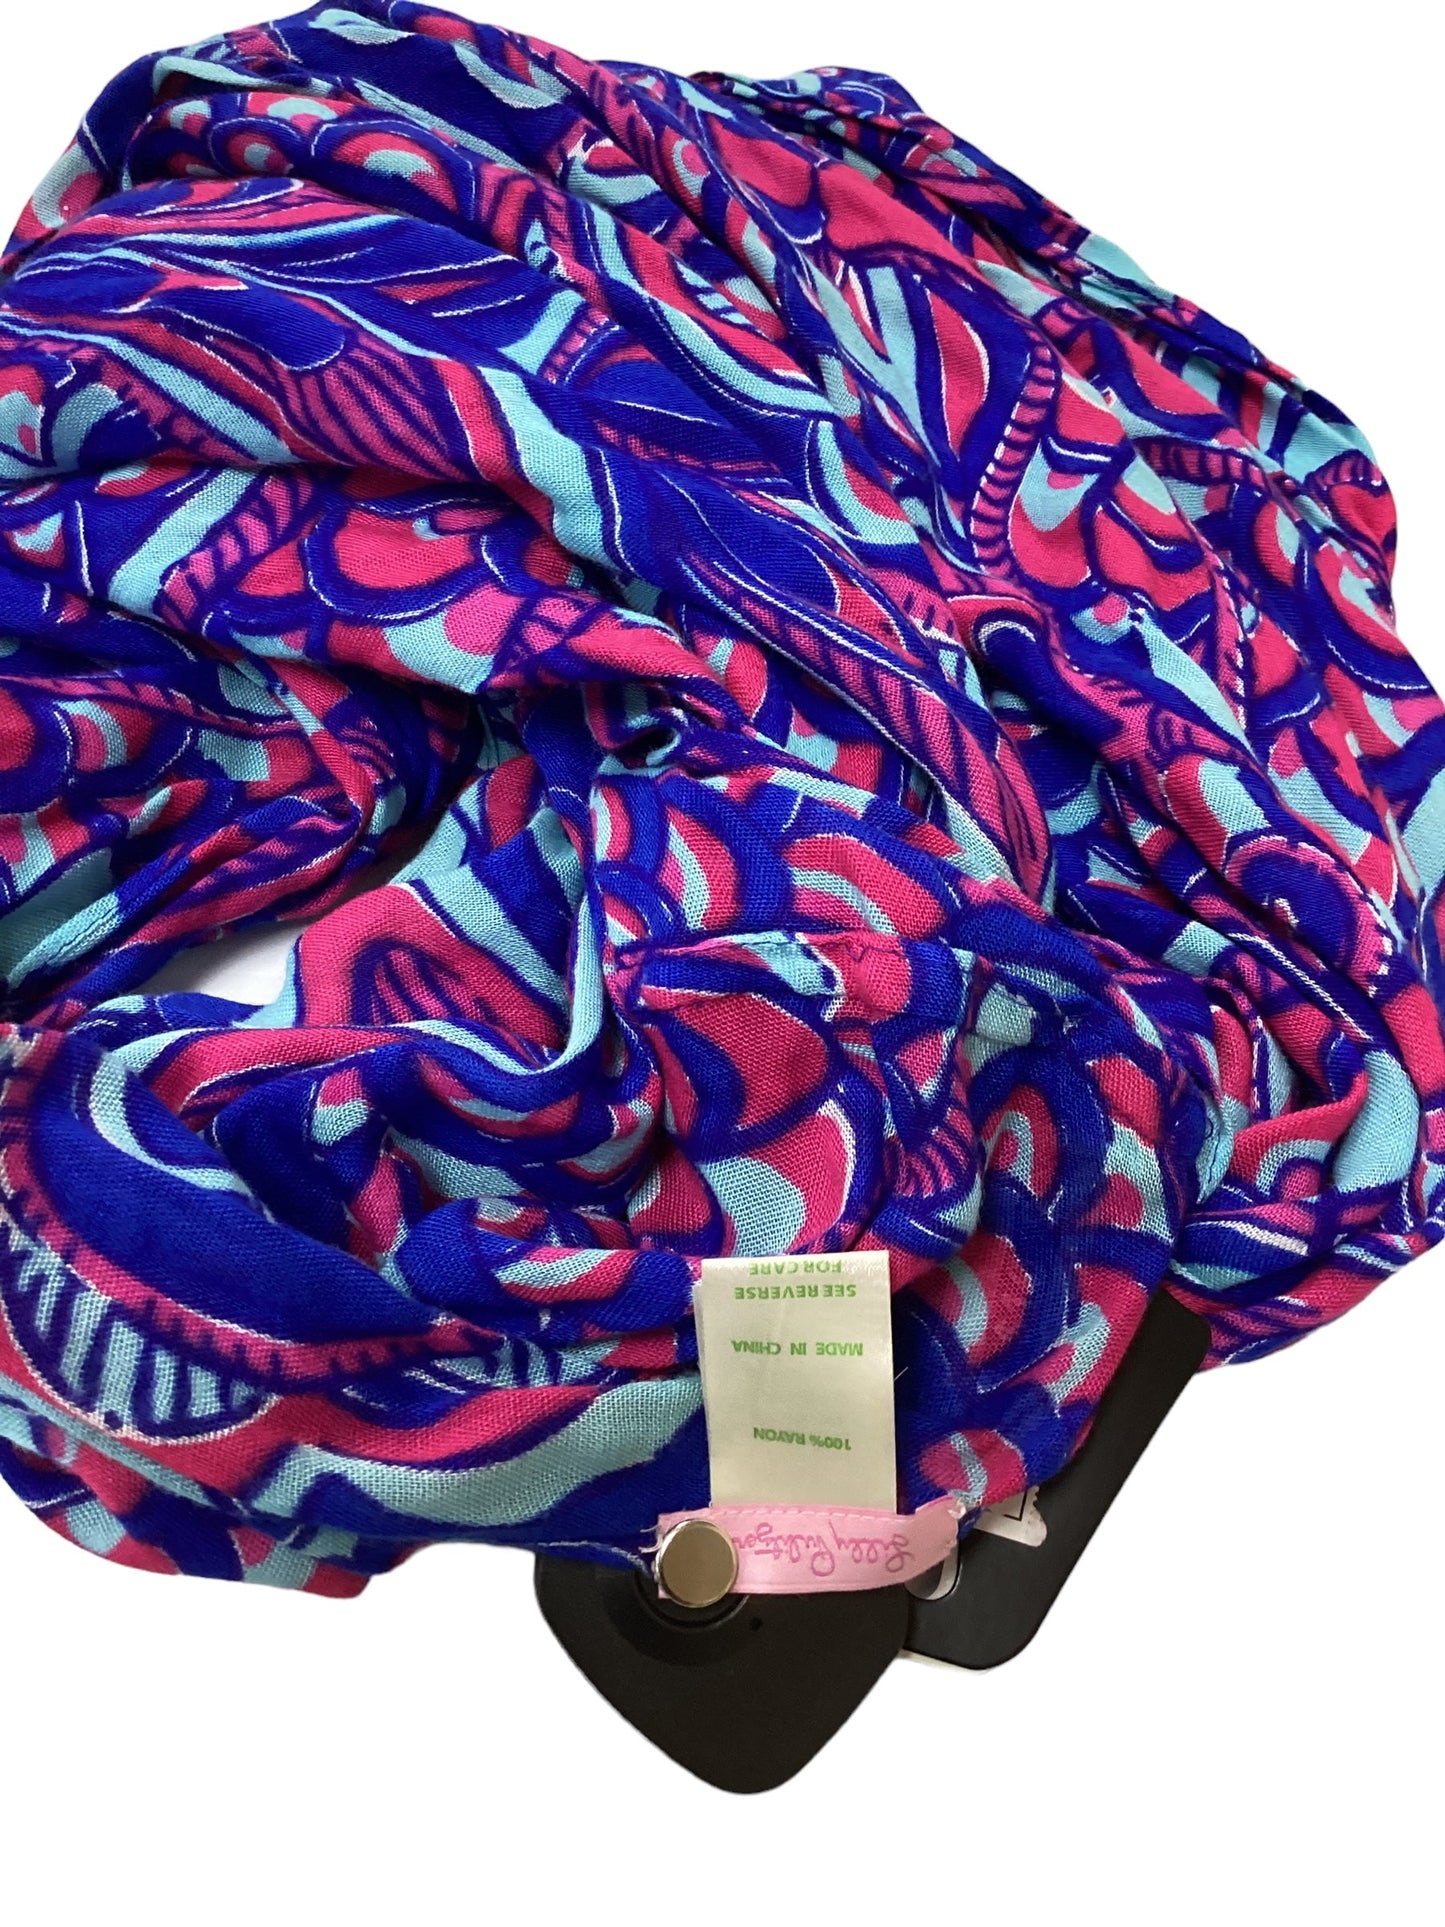 Scarf Designer By Lilly Pulitzer